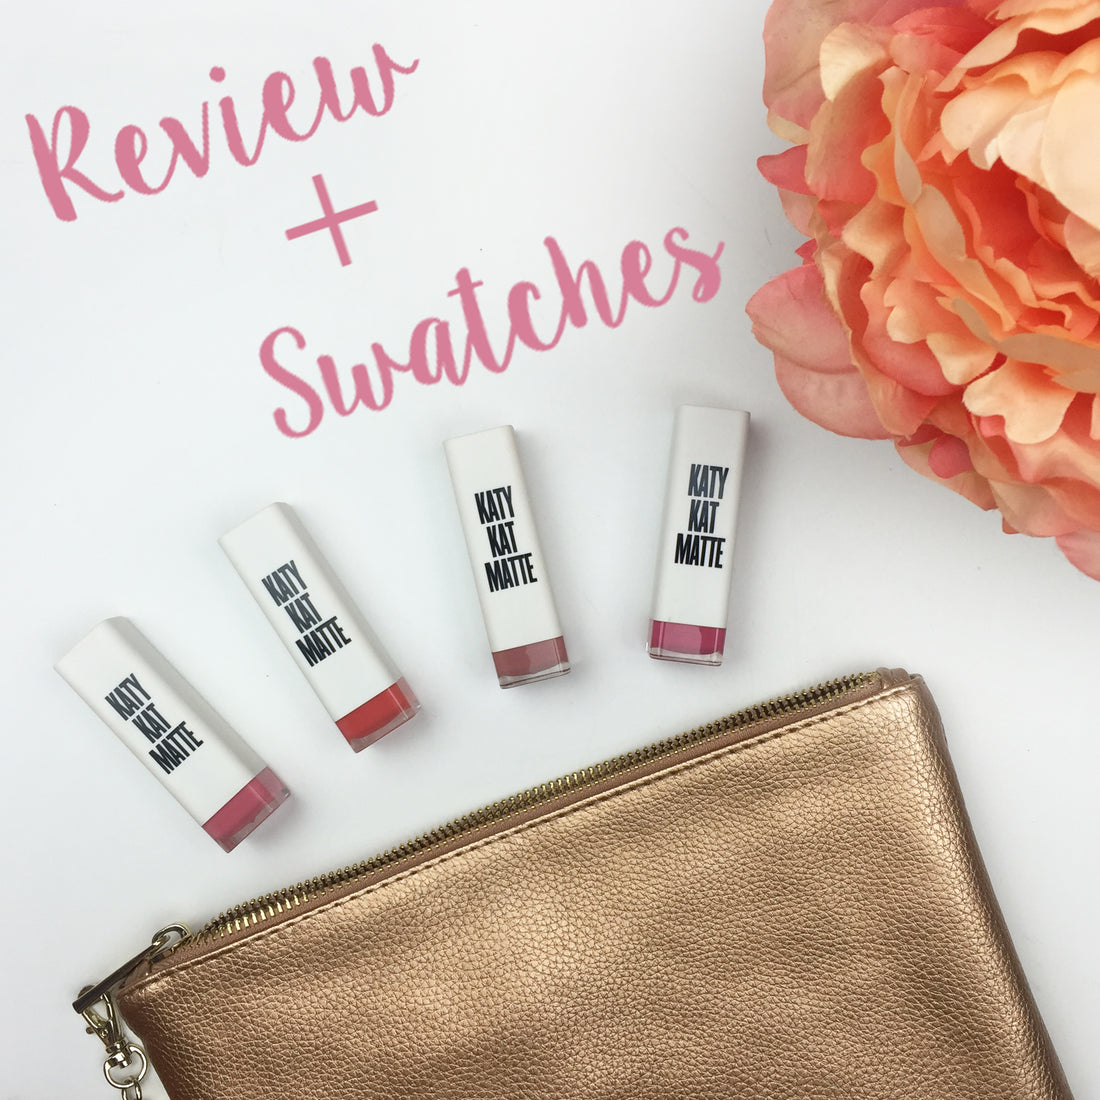 Covergirl Katy Kat Matte Lipsticks | Review & Swatches